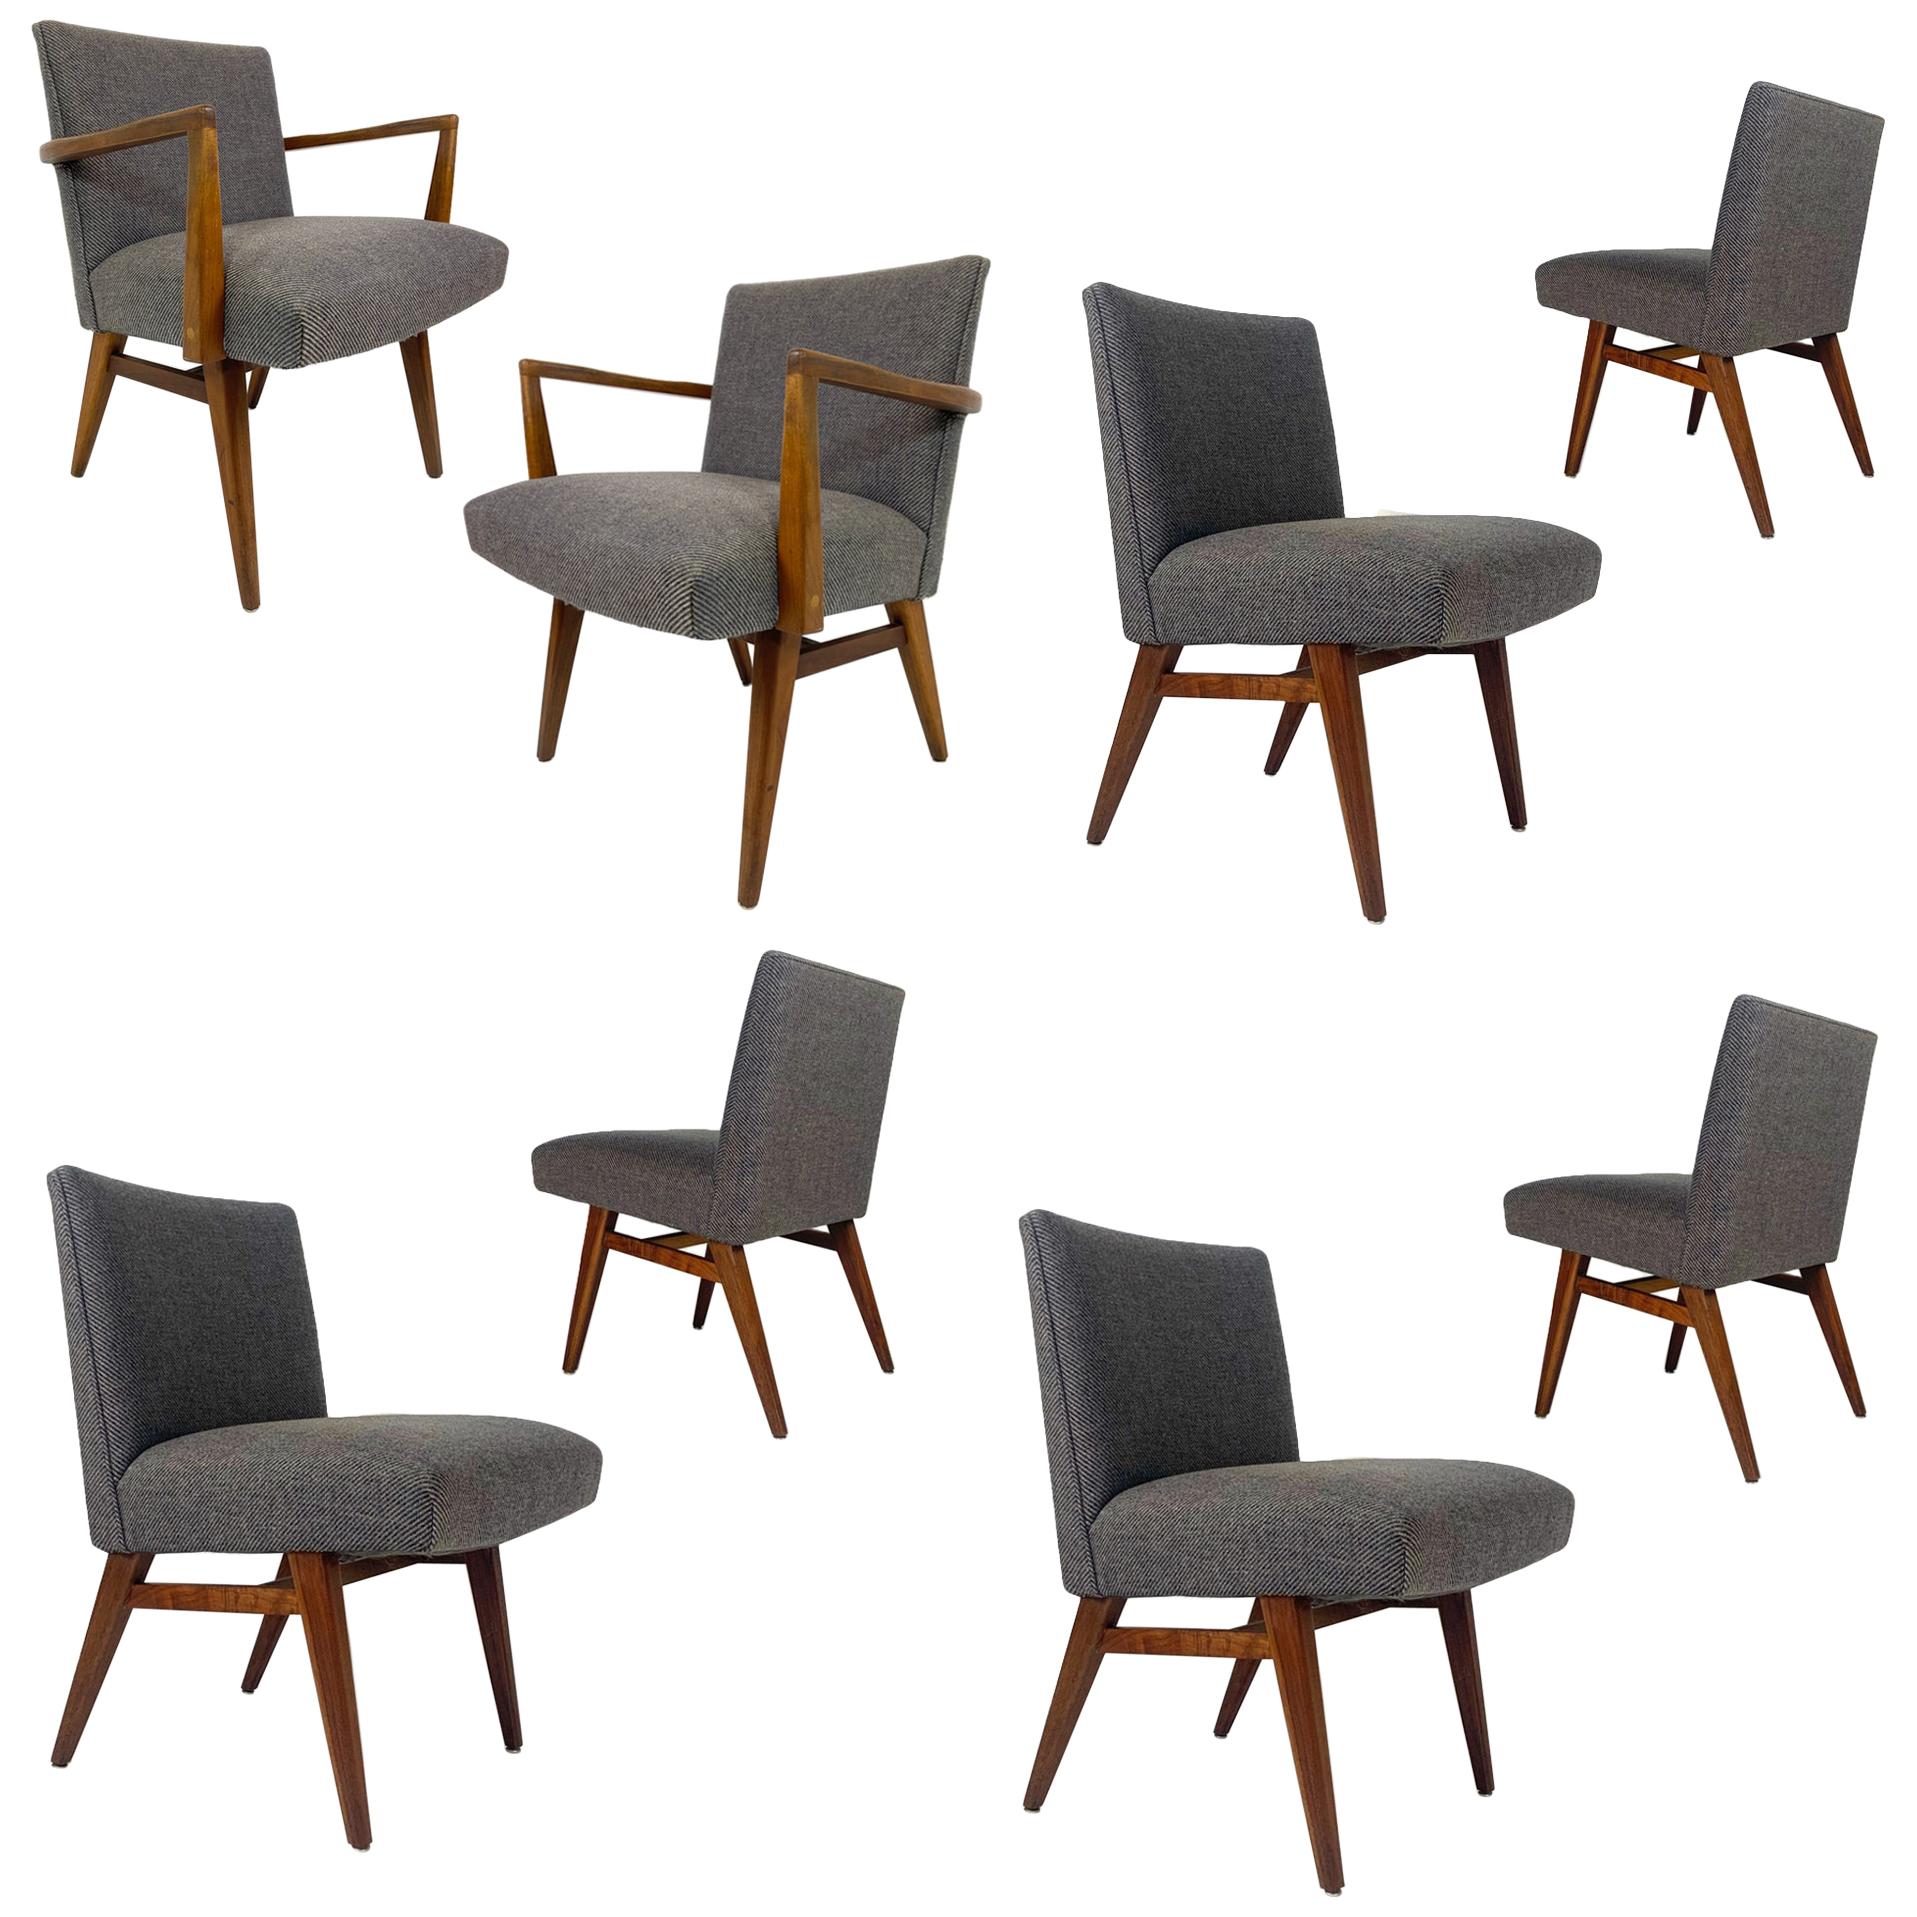 Rare Set of 8 Jens Risom Upholstered and Walnut Dining Chairs Model #205